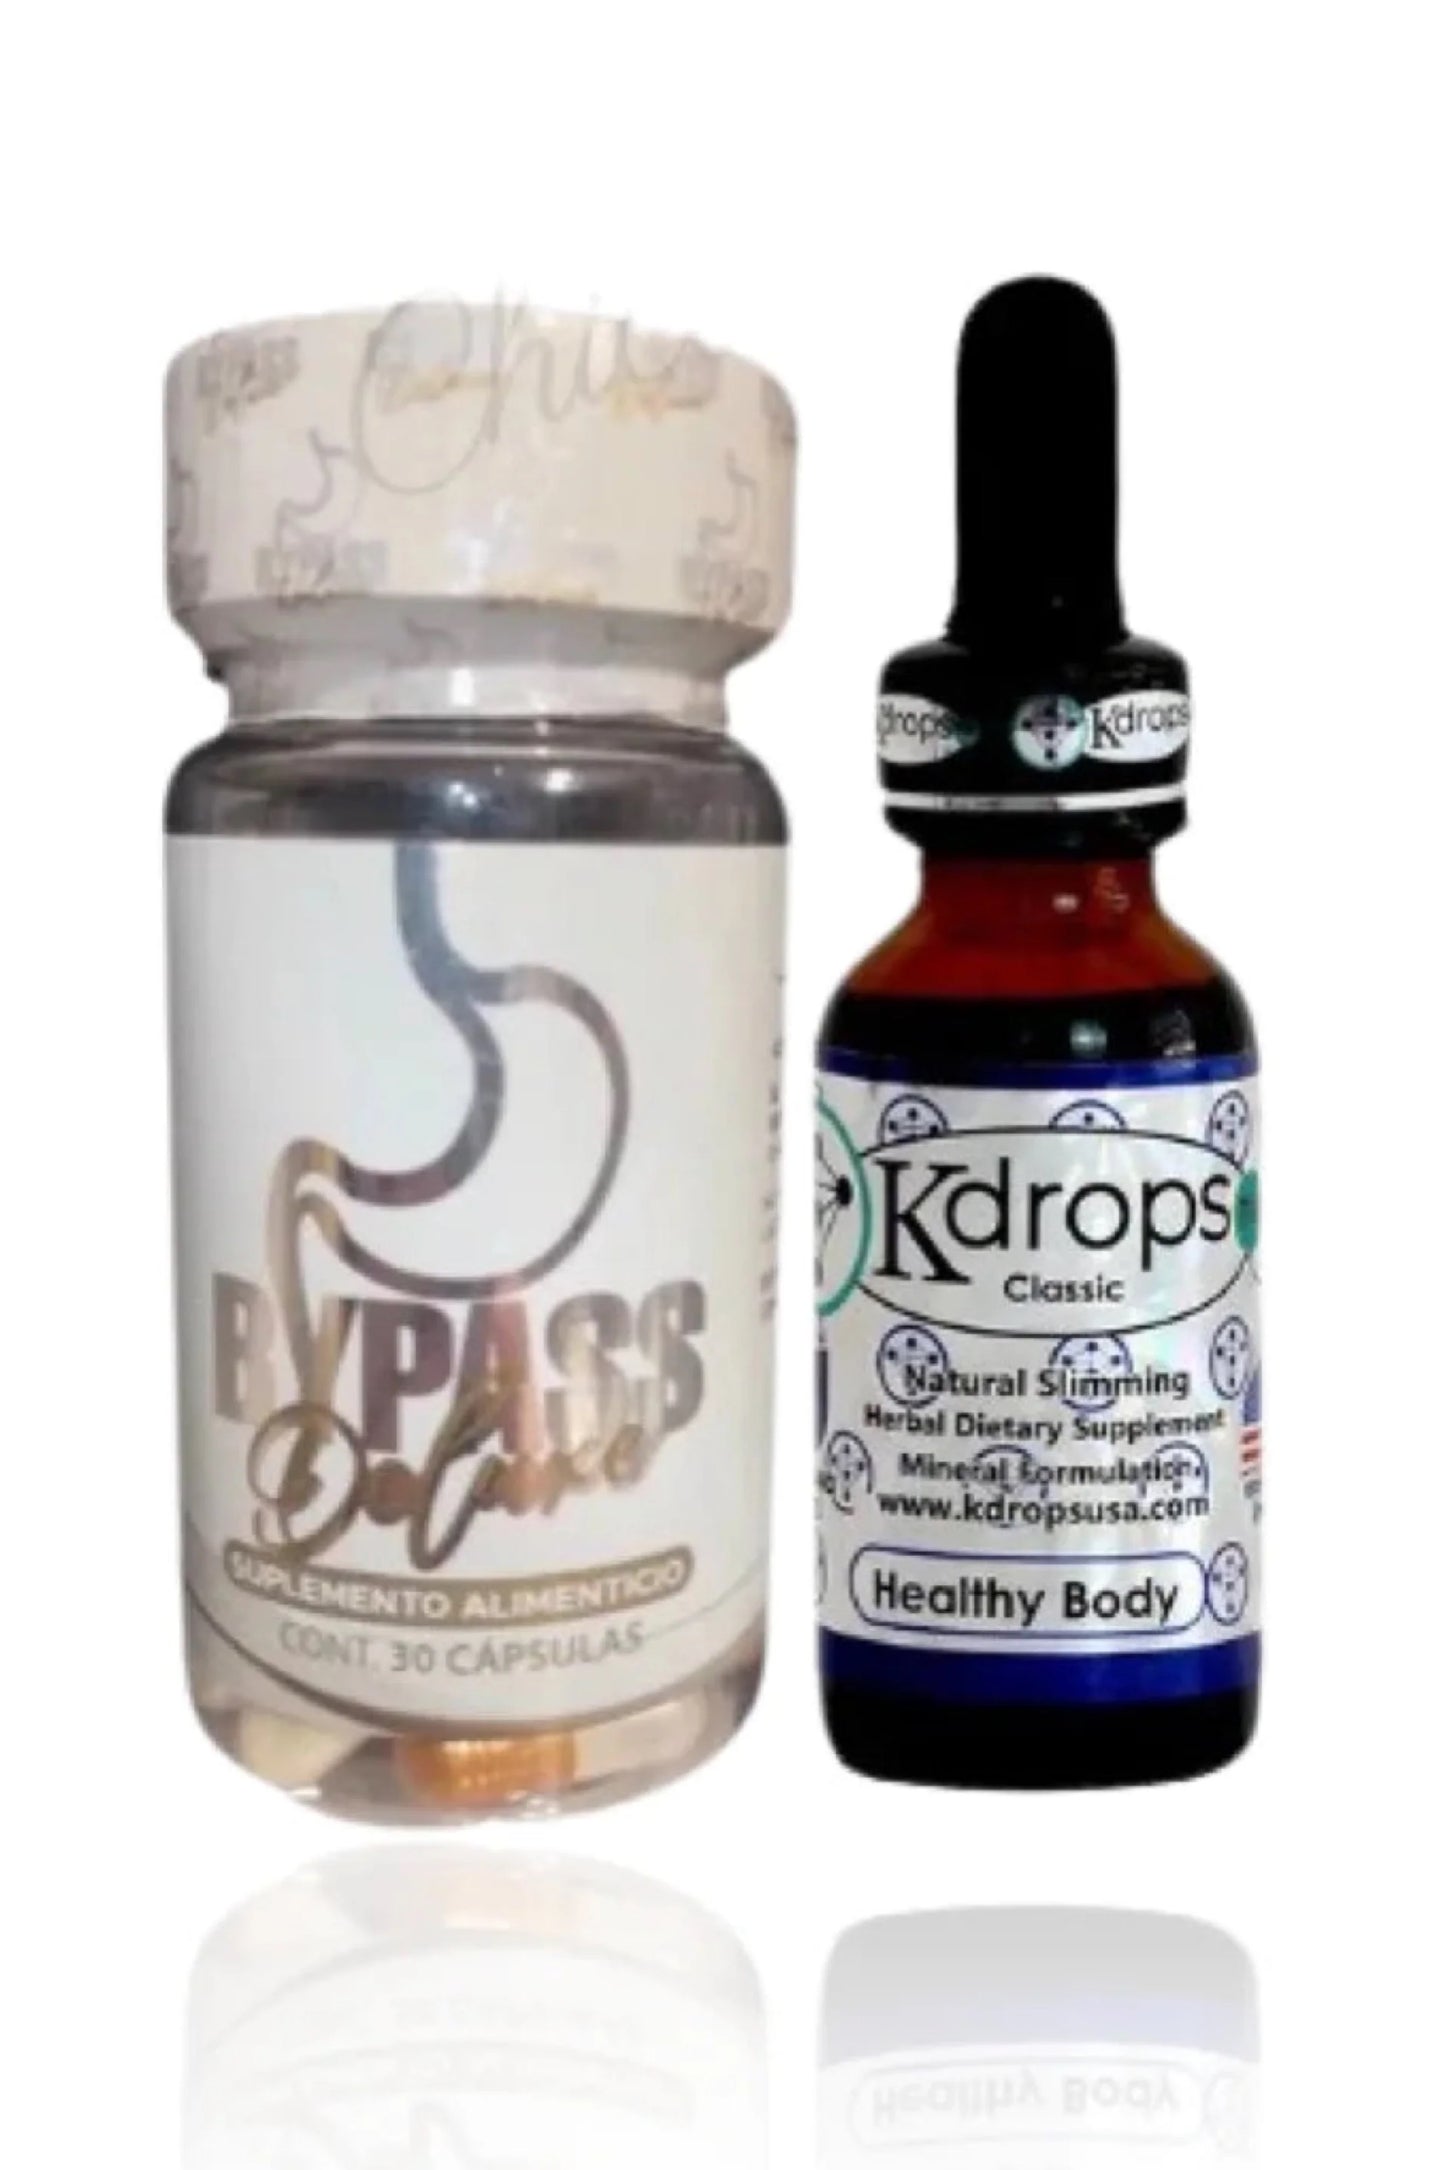 Bypass Deluxe & Kdrops classic